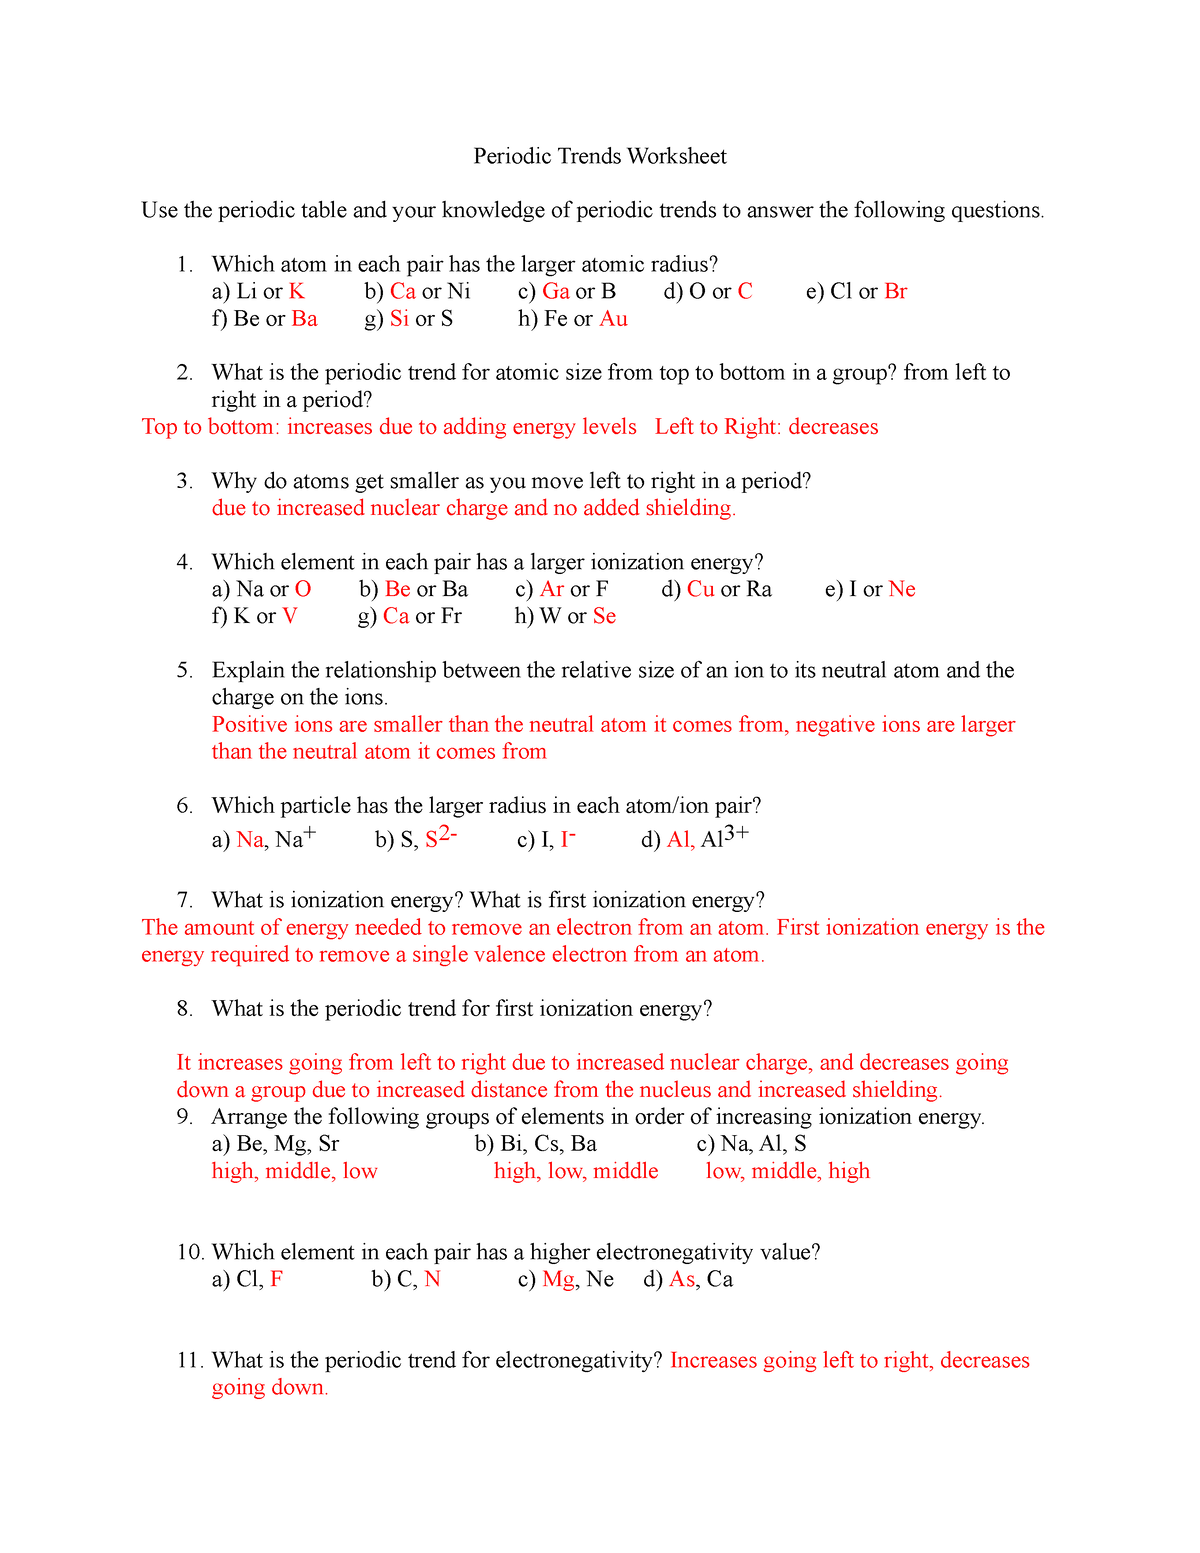 periodic trends worksheet #3 answers